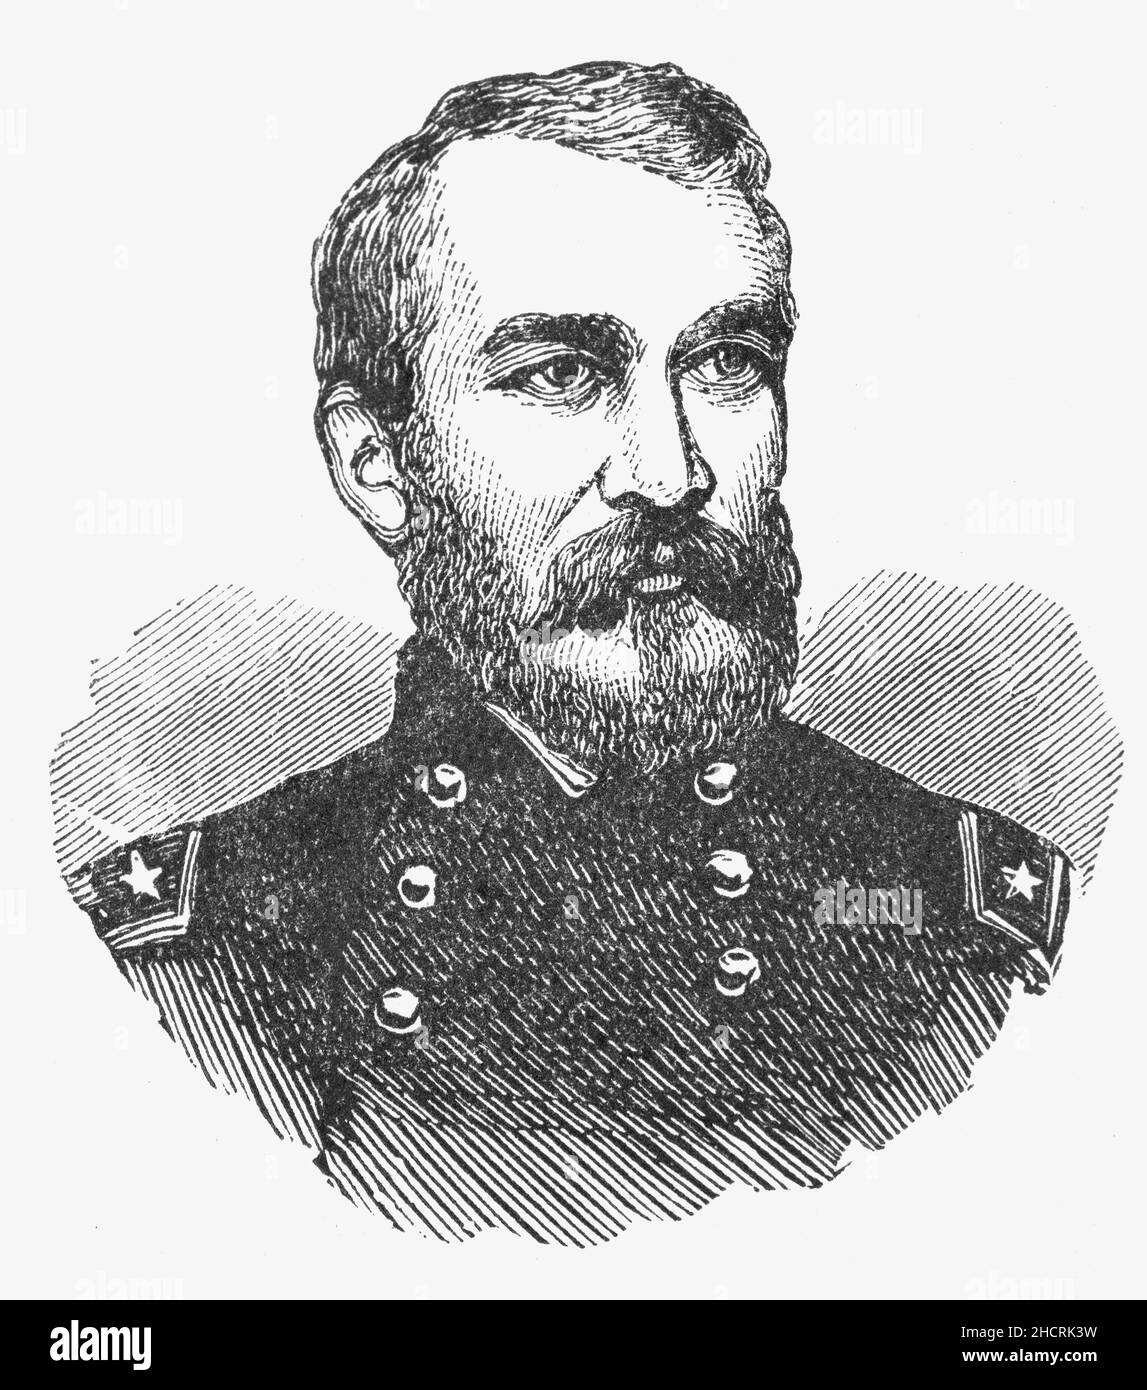 A late 19th Century portrait of Philip Henry Sheridan (1831-1888) aka Fightin' Phil, a Union general in the American Civil War, noted for his rapid rise to major general and his close association with General-in-chief Ulysses S. Grant, who transferred Sheridan from command of an infantry division to lead the Cavalry Corps of the Army of the Potomac in the East using scorched-earth tactics. In 1865, his cavalry pursued Gen. Robert E. Lee and was instrumental in forcing his surrender at Appomattox Courthouse. In 1883, Sheridan was appointed general-in-chief of the U.S. Army. Stock Photo